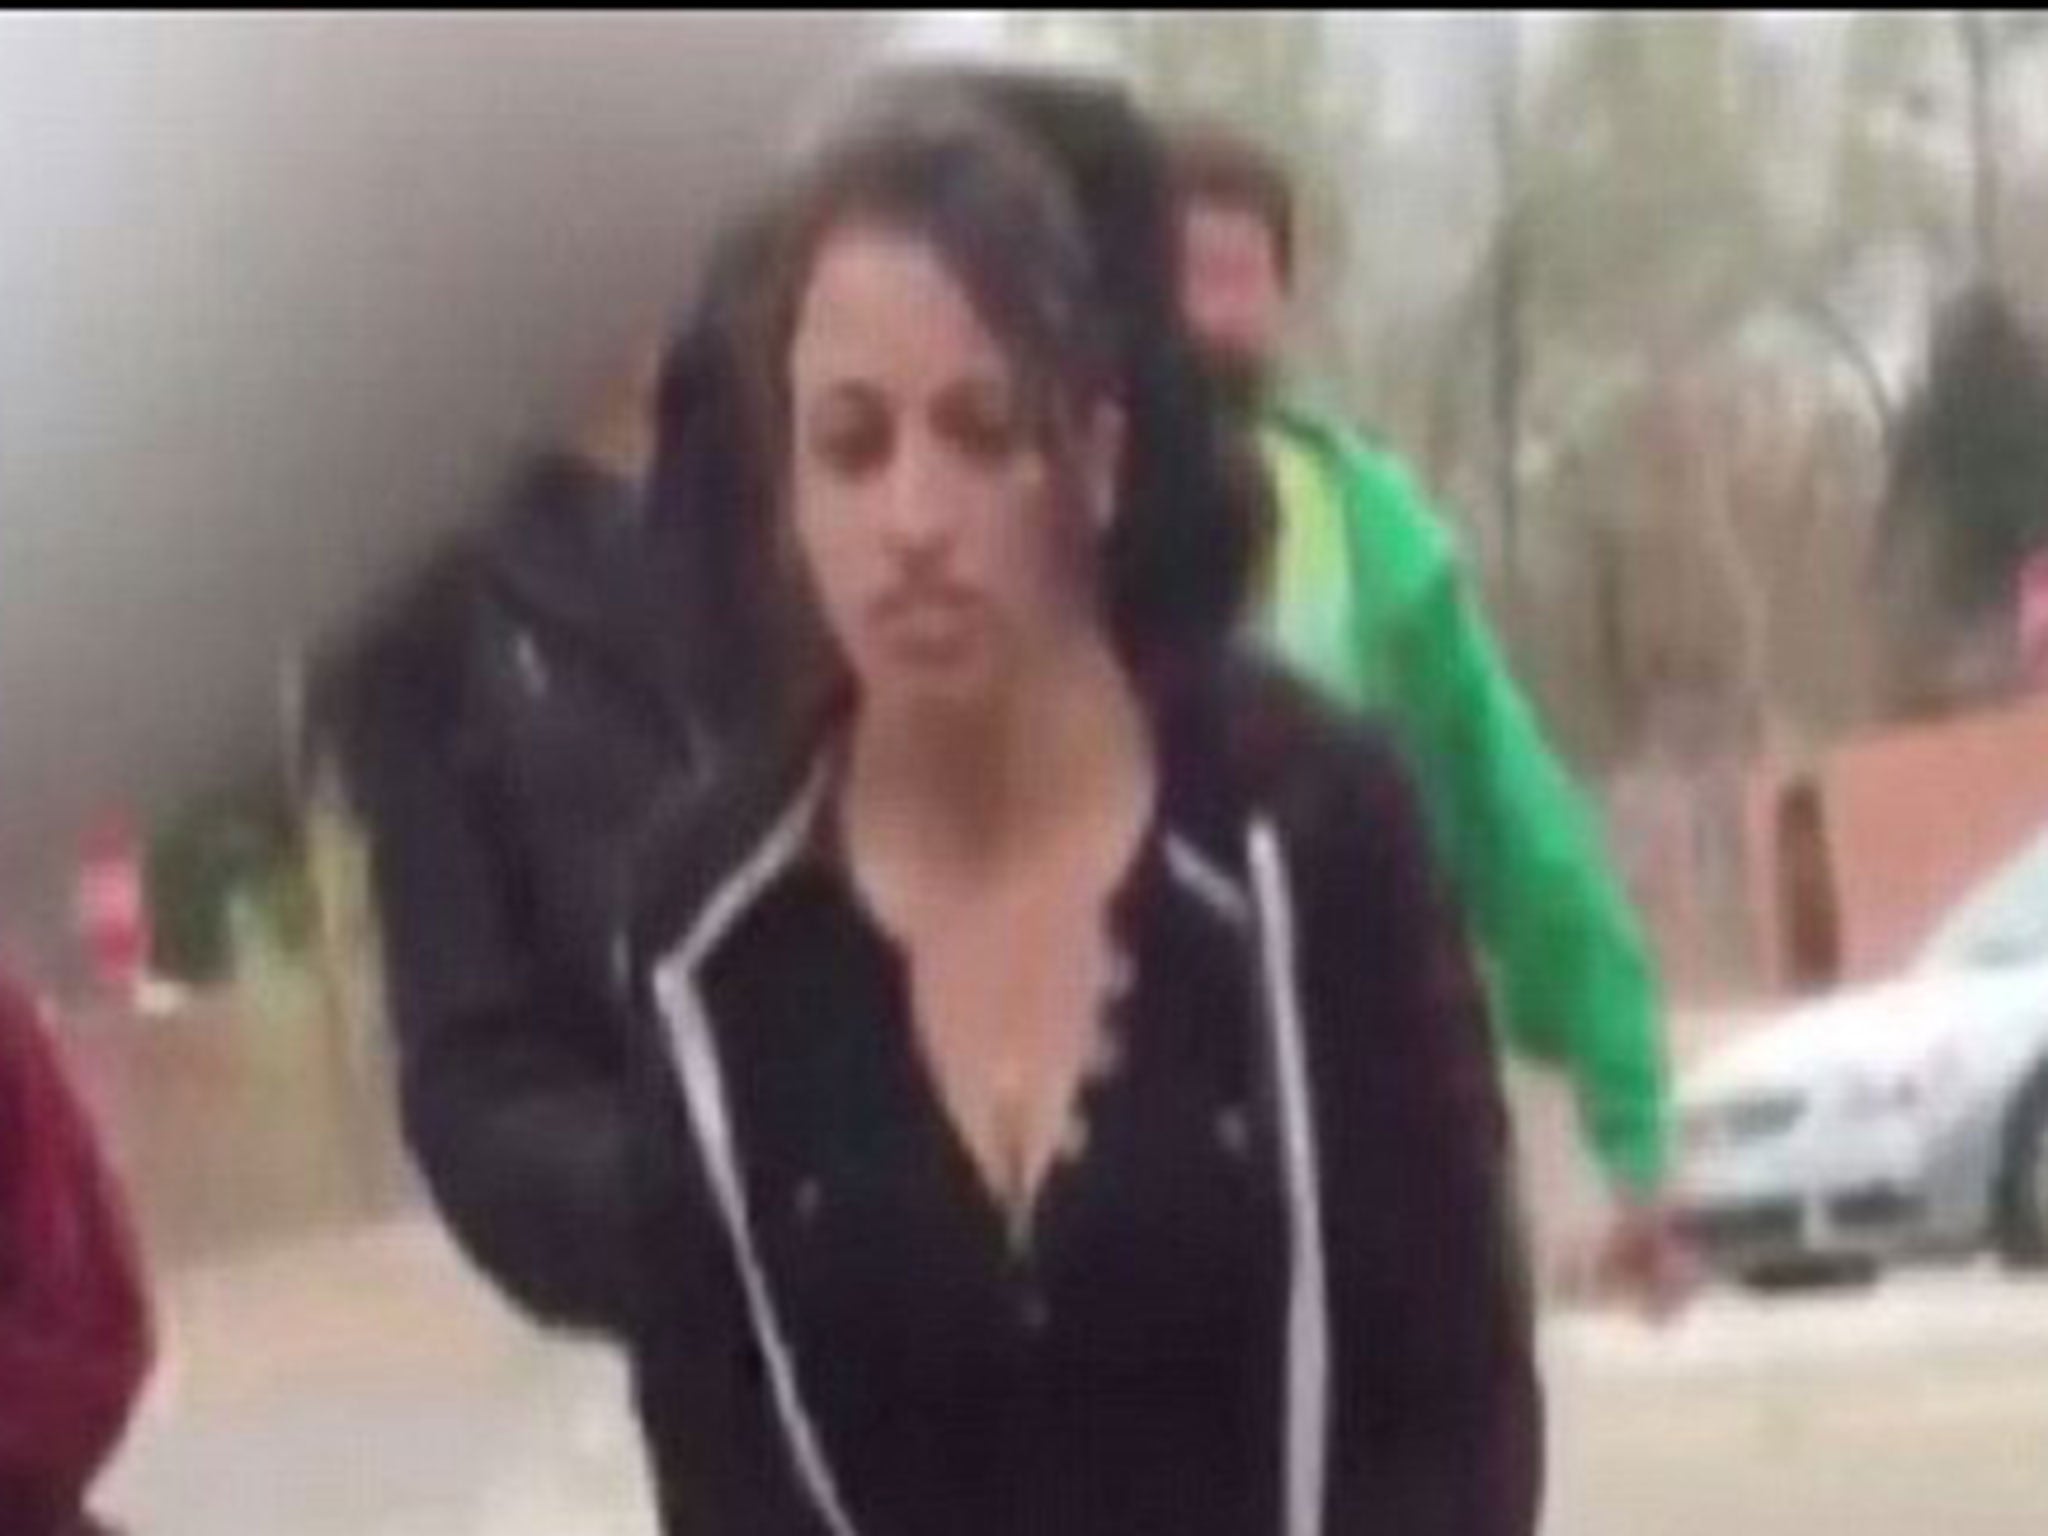 Nicole Morlan was filmed cheering as her daughter fought outside of the school (KOAT7)